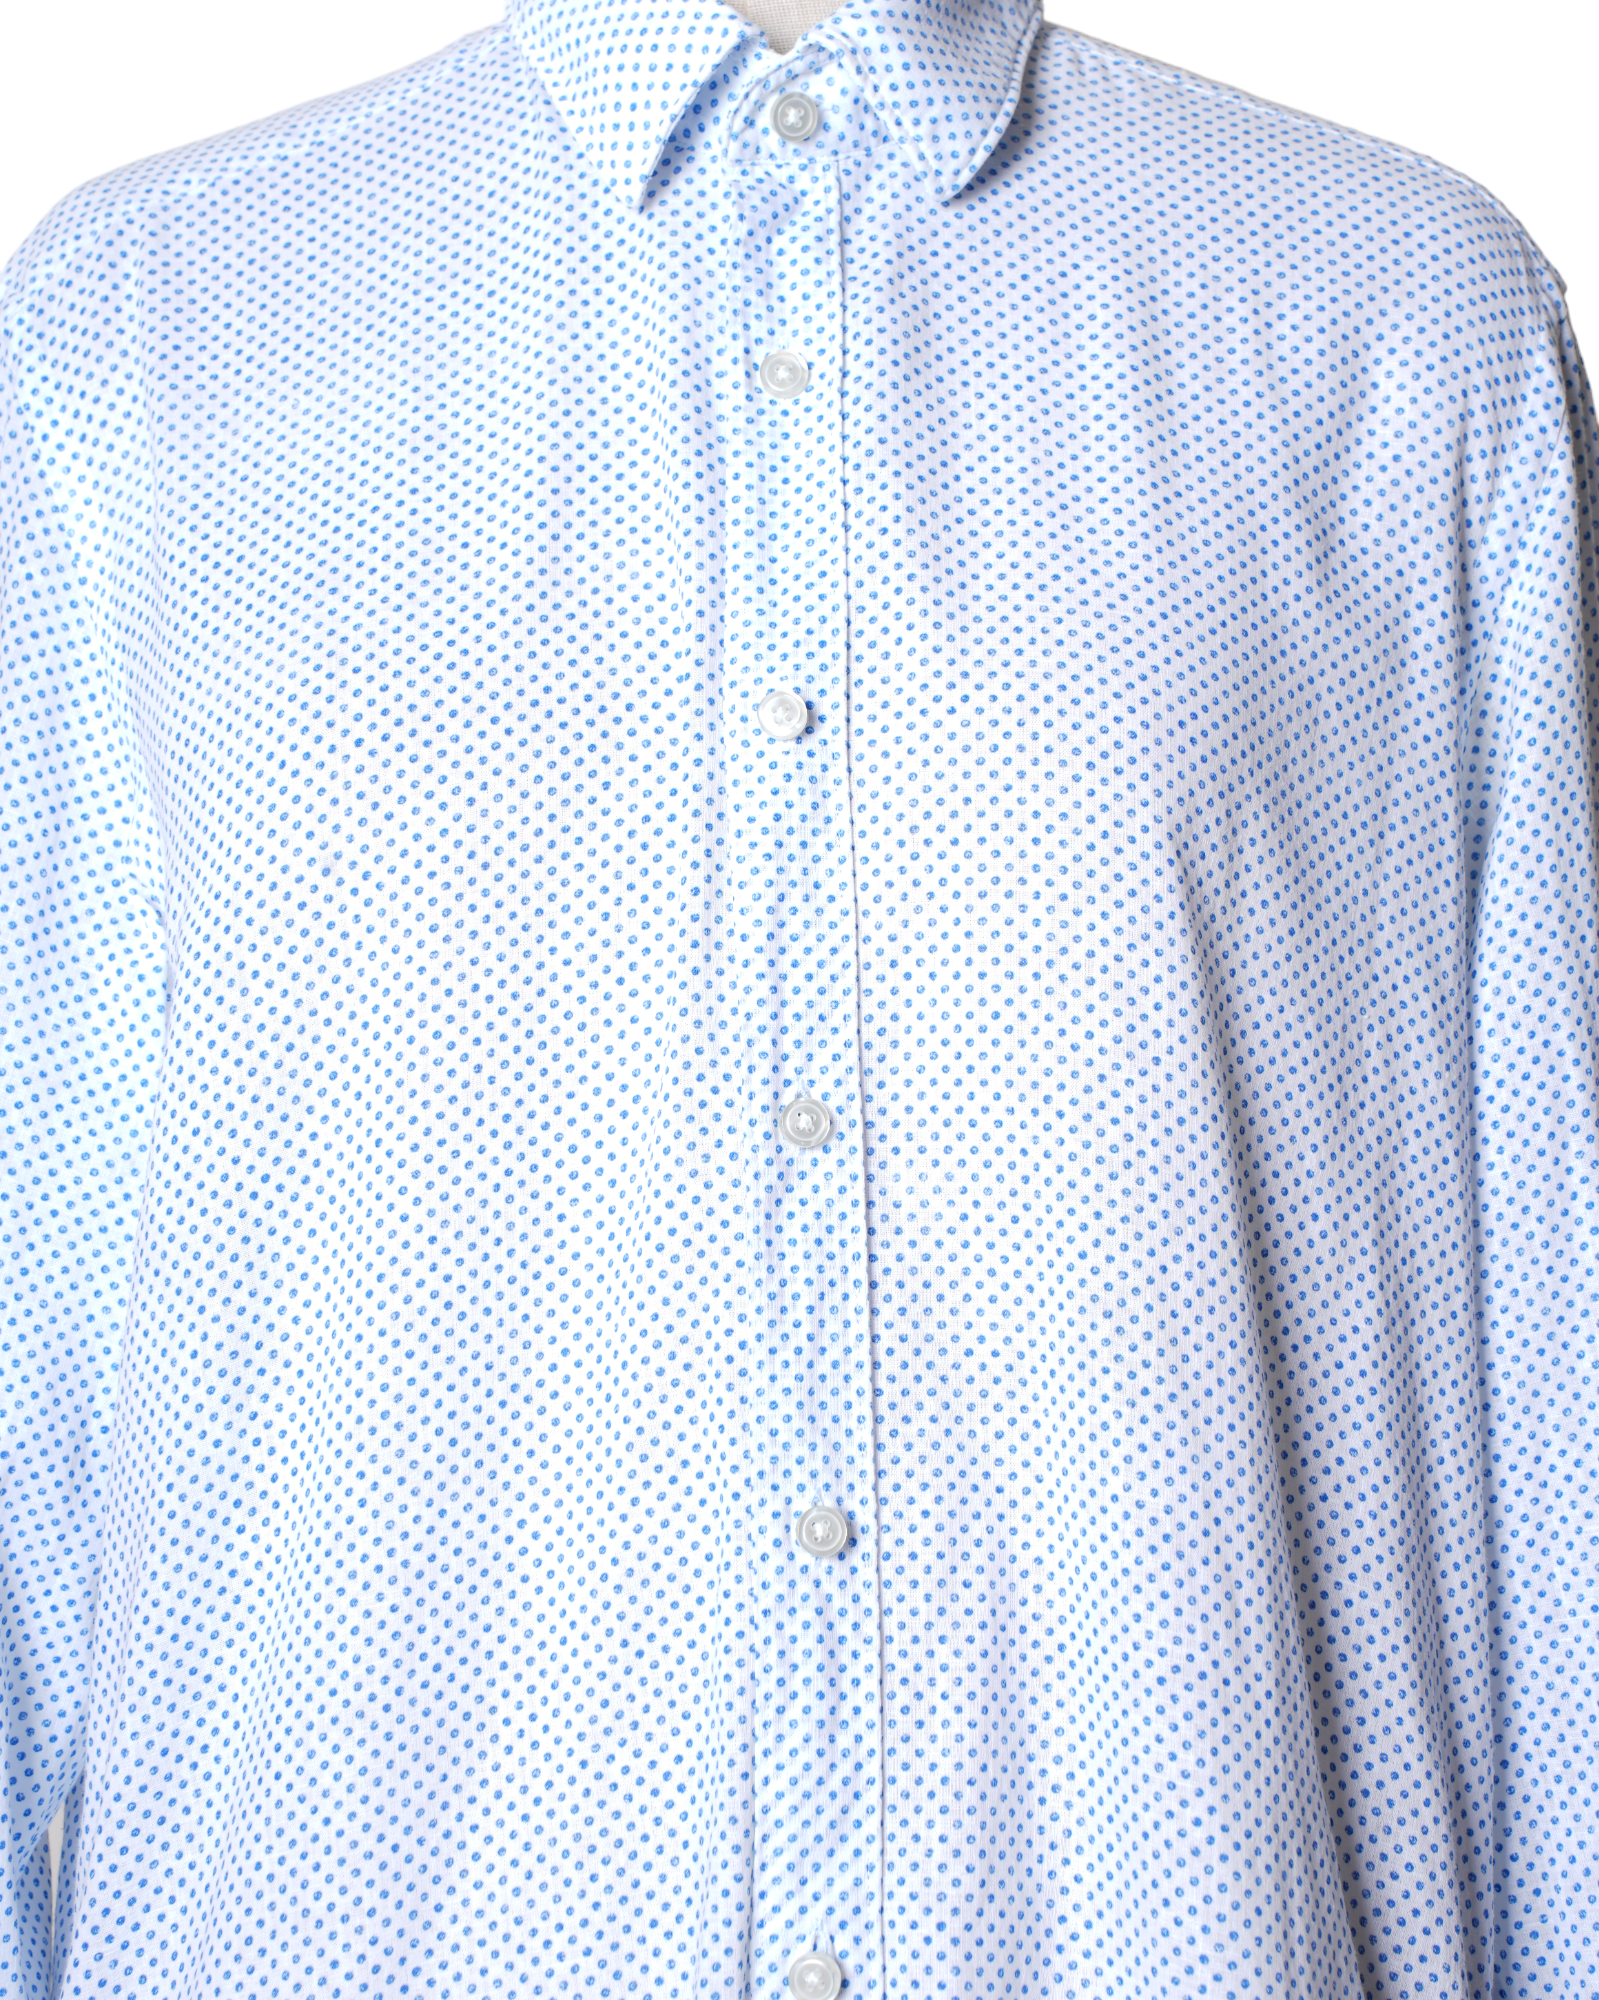 Boss White With Blue Polka